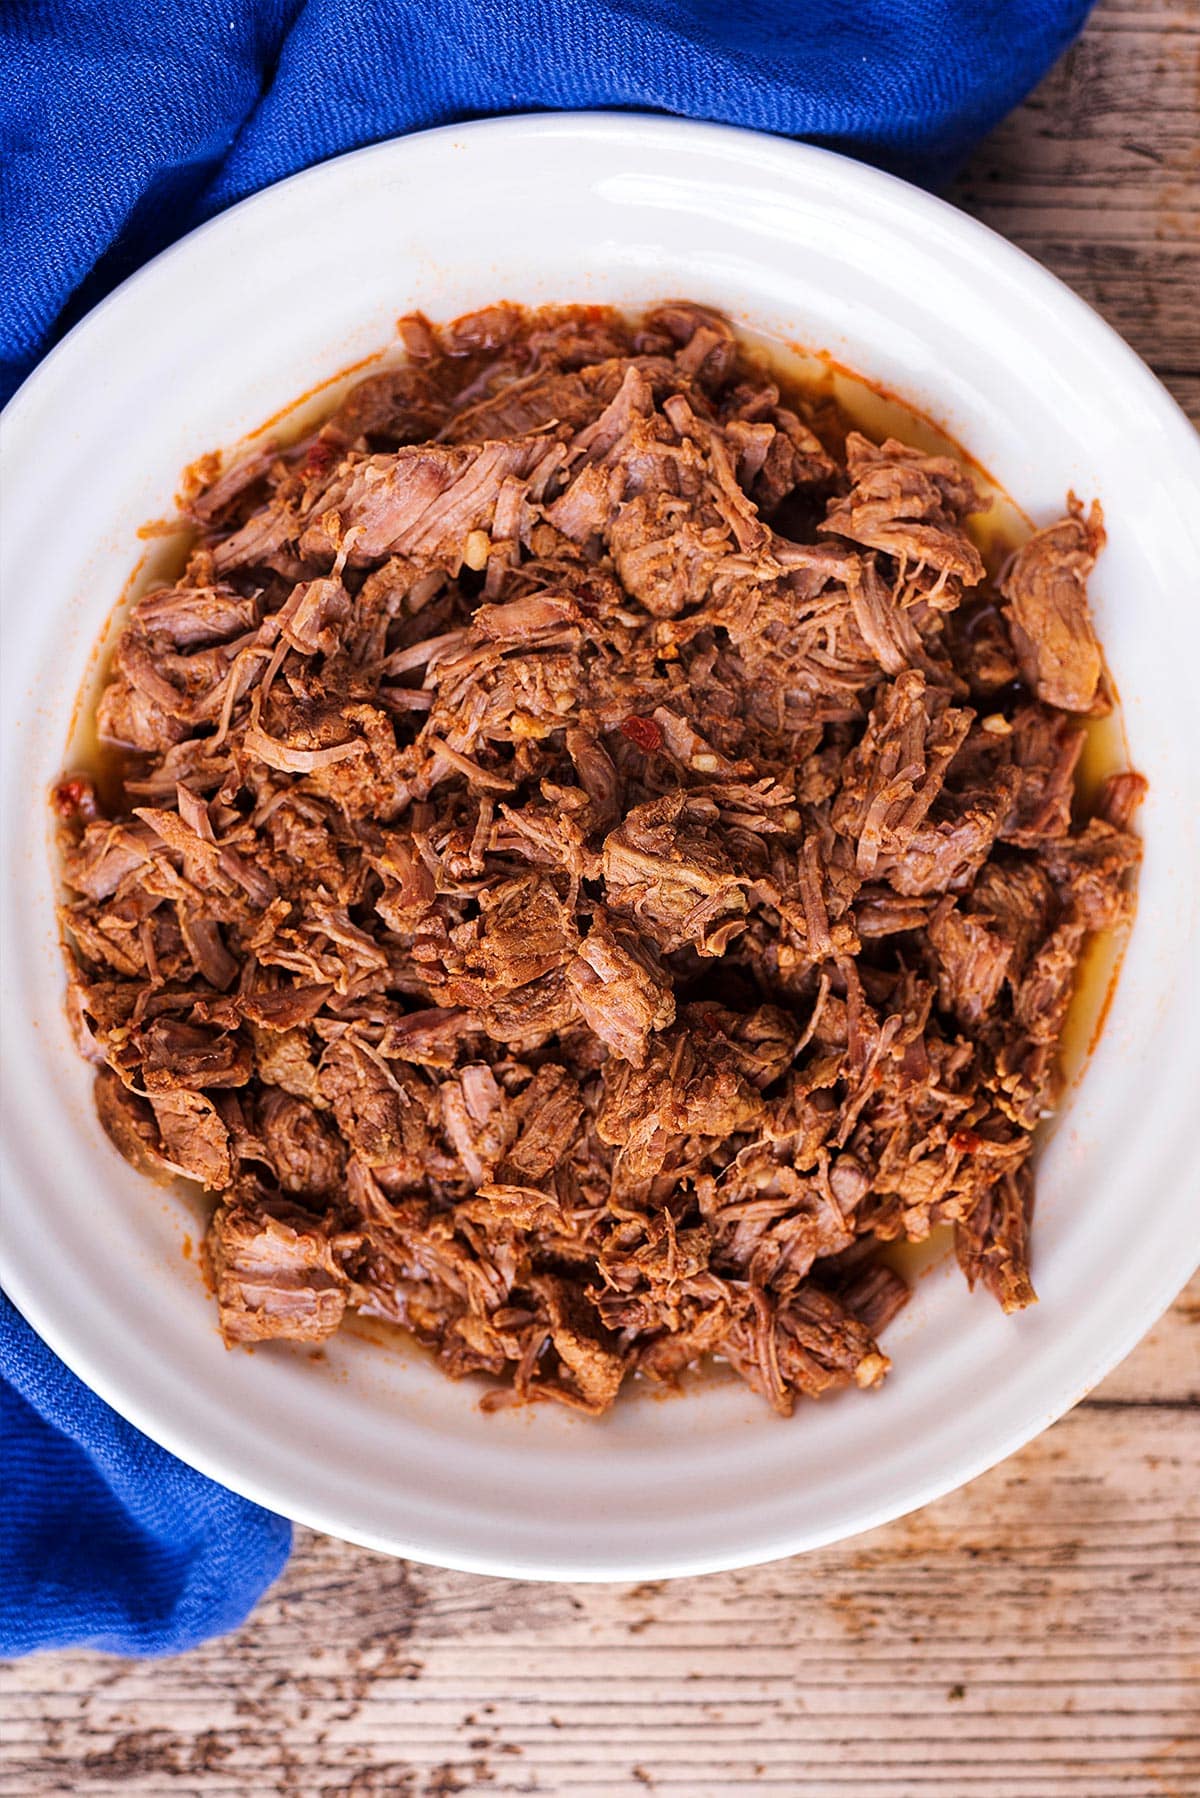 A bowl of pulled beef next to a blue towel.